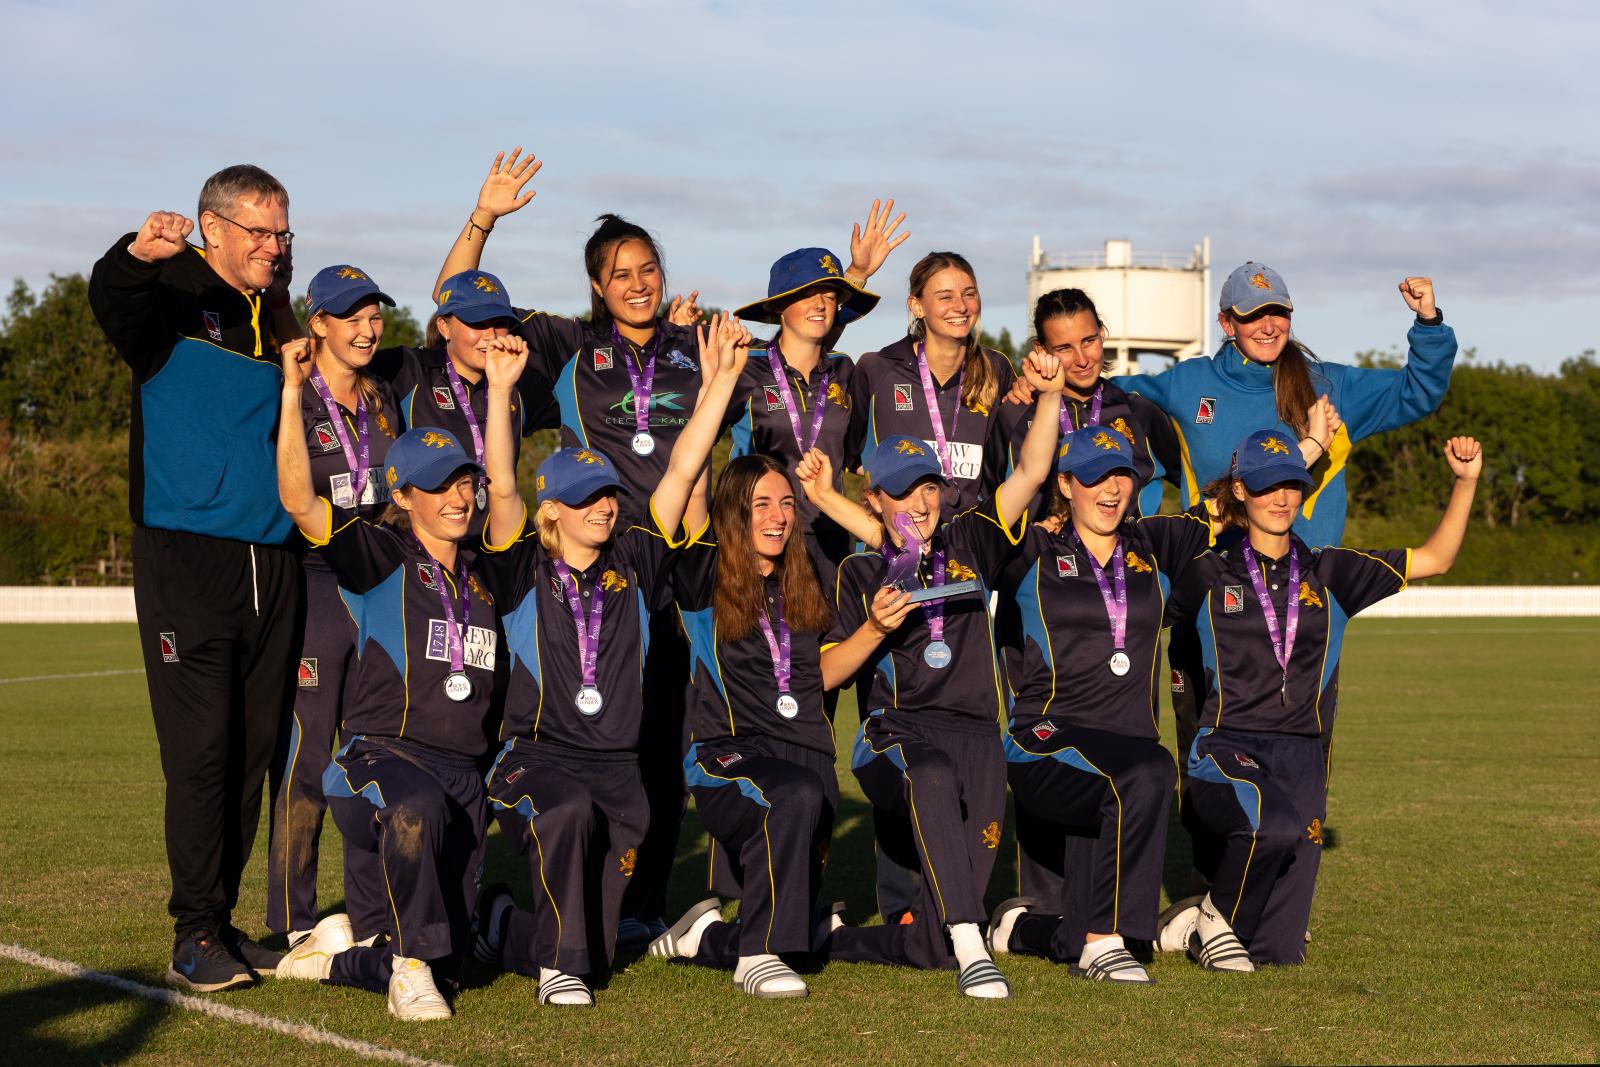 The Under 18s Girls were crowned ECB Royal London County Cup Champions last year. Credit: Mark Lockett.